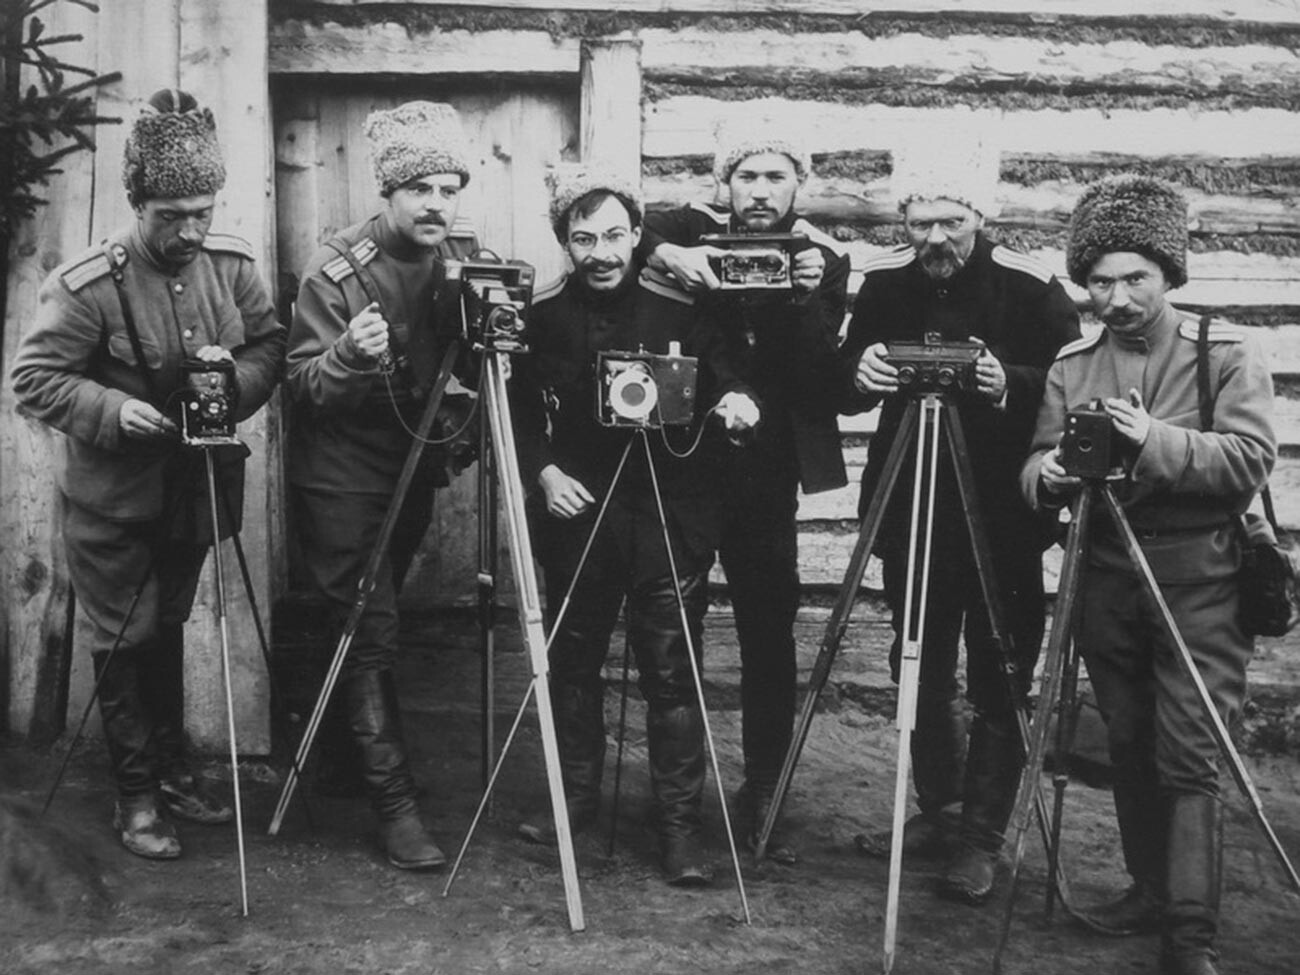 Photographers of a Siberian division of the Russian Empire, 1915